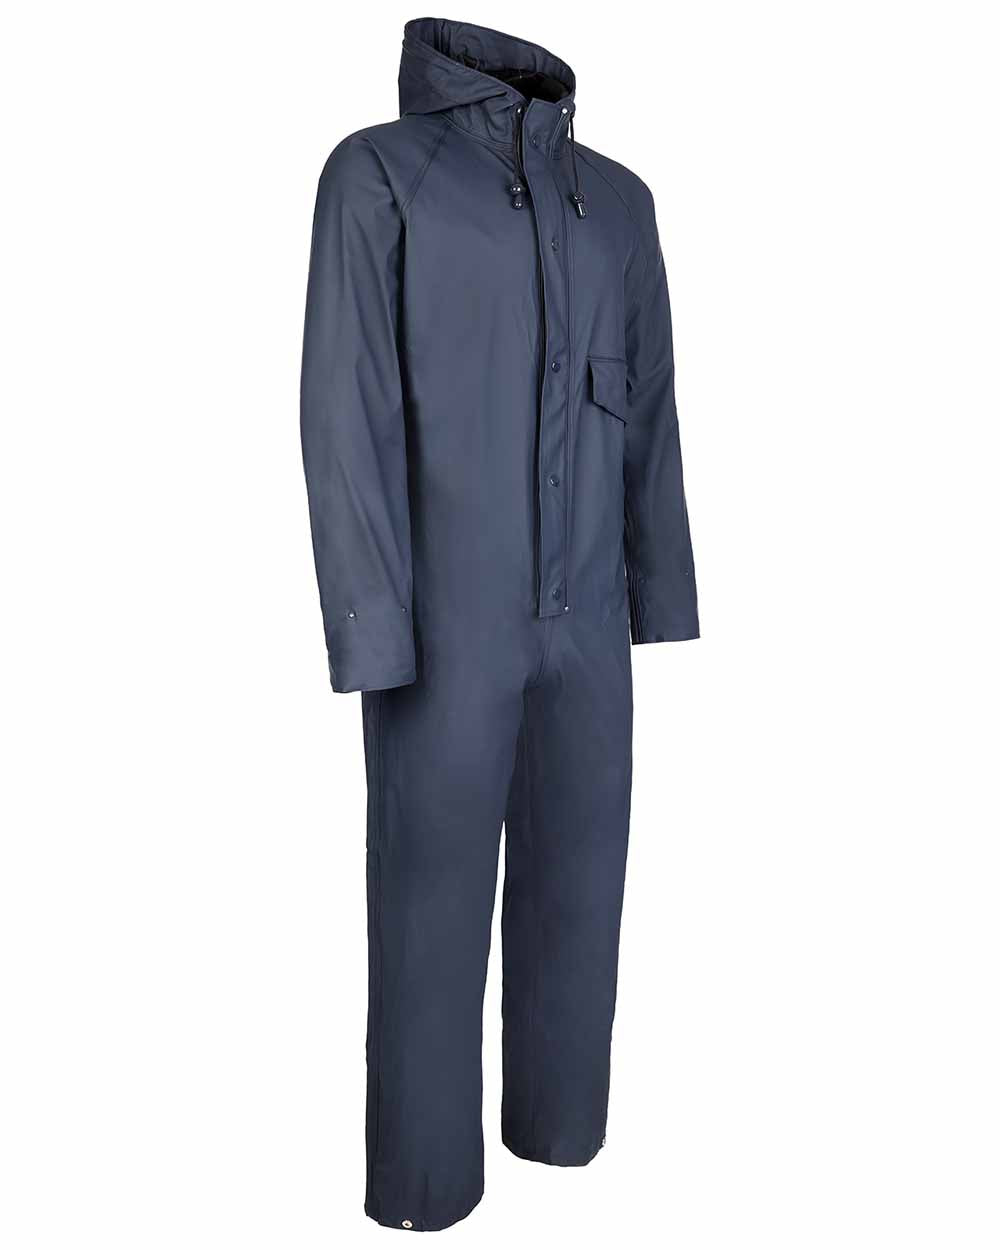 Navy coloured Fort Fortex Flex Coverall on white background 